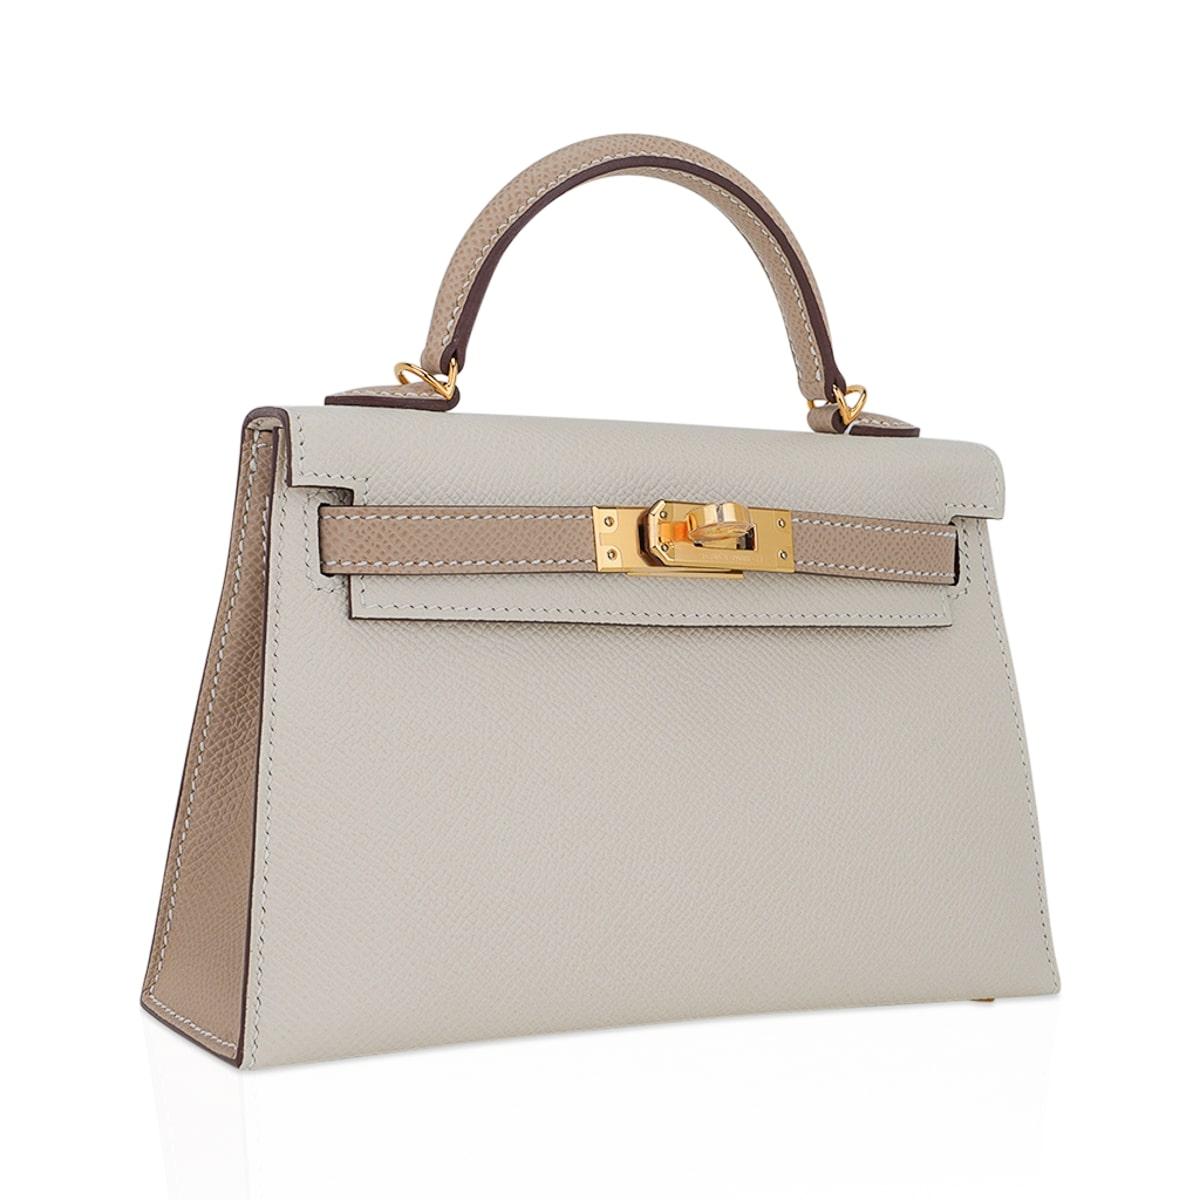 Mightychic offers an Hermes Kelly HSS 20 Sellier mini bag featured in coveted Nata and Trench.
A stunning neutral color combination for year round wear.
Epsom leather accentuated with Gold hardware.
Comes with signature Hermes box, shoulder strap,